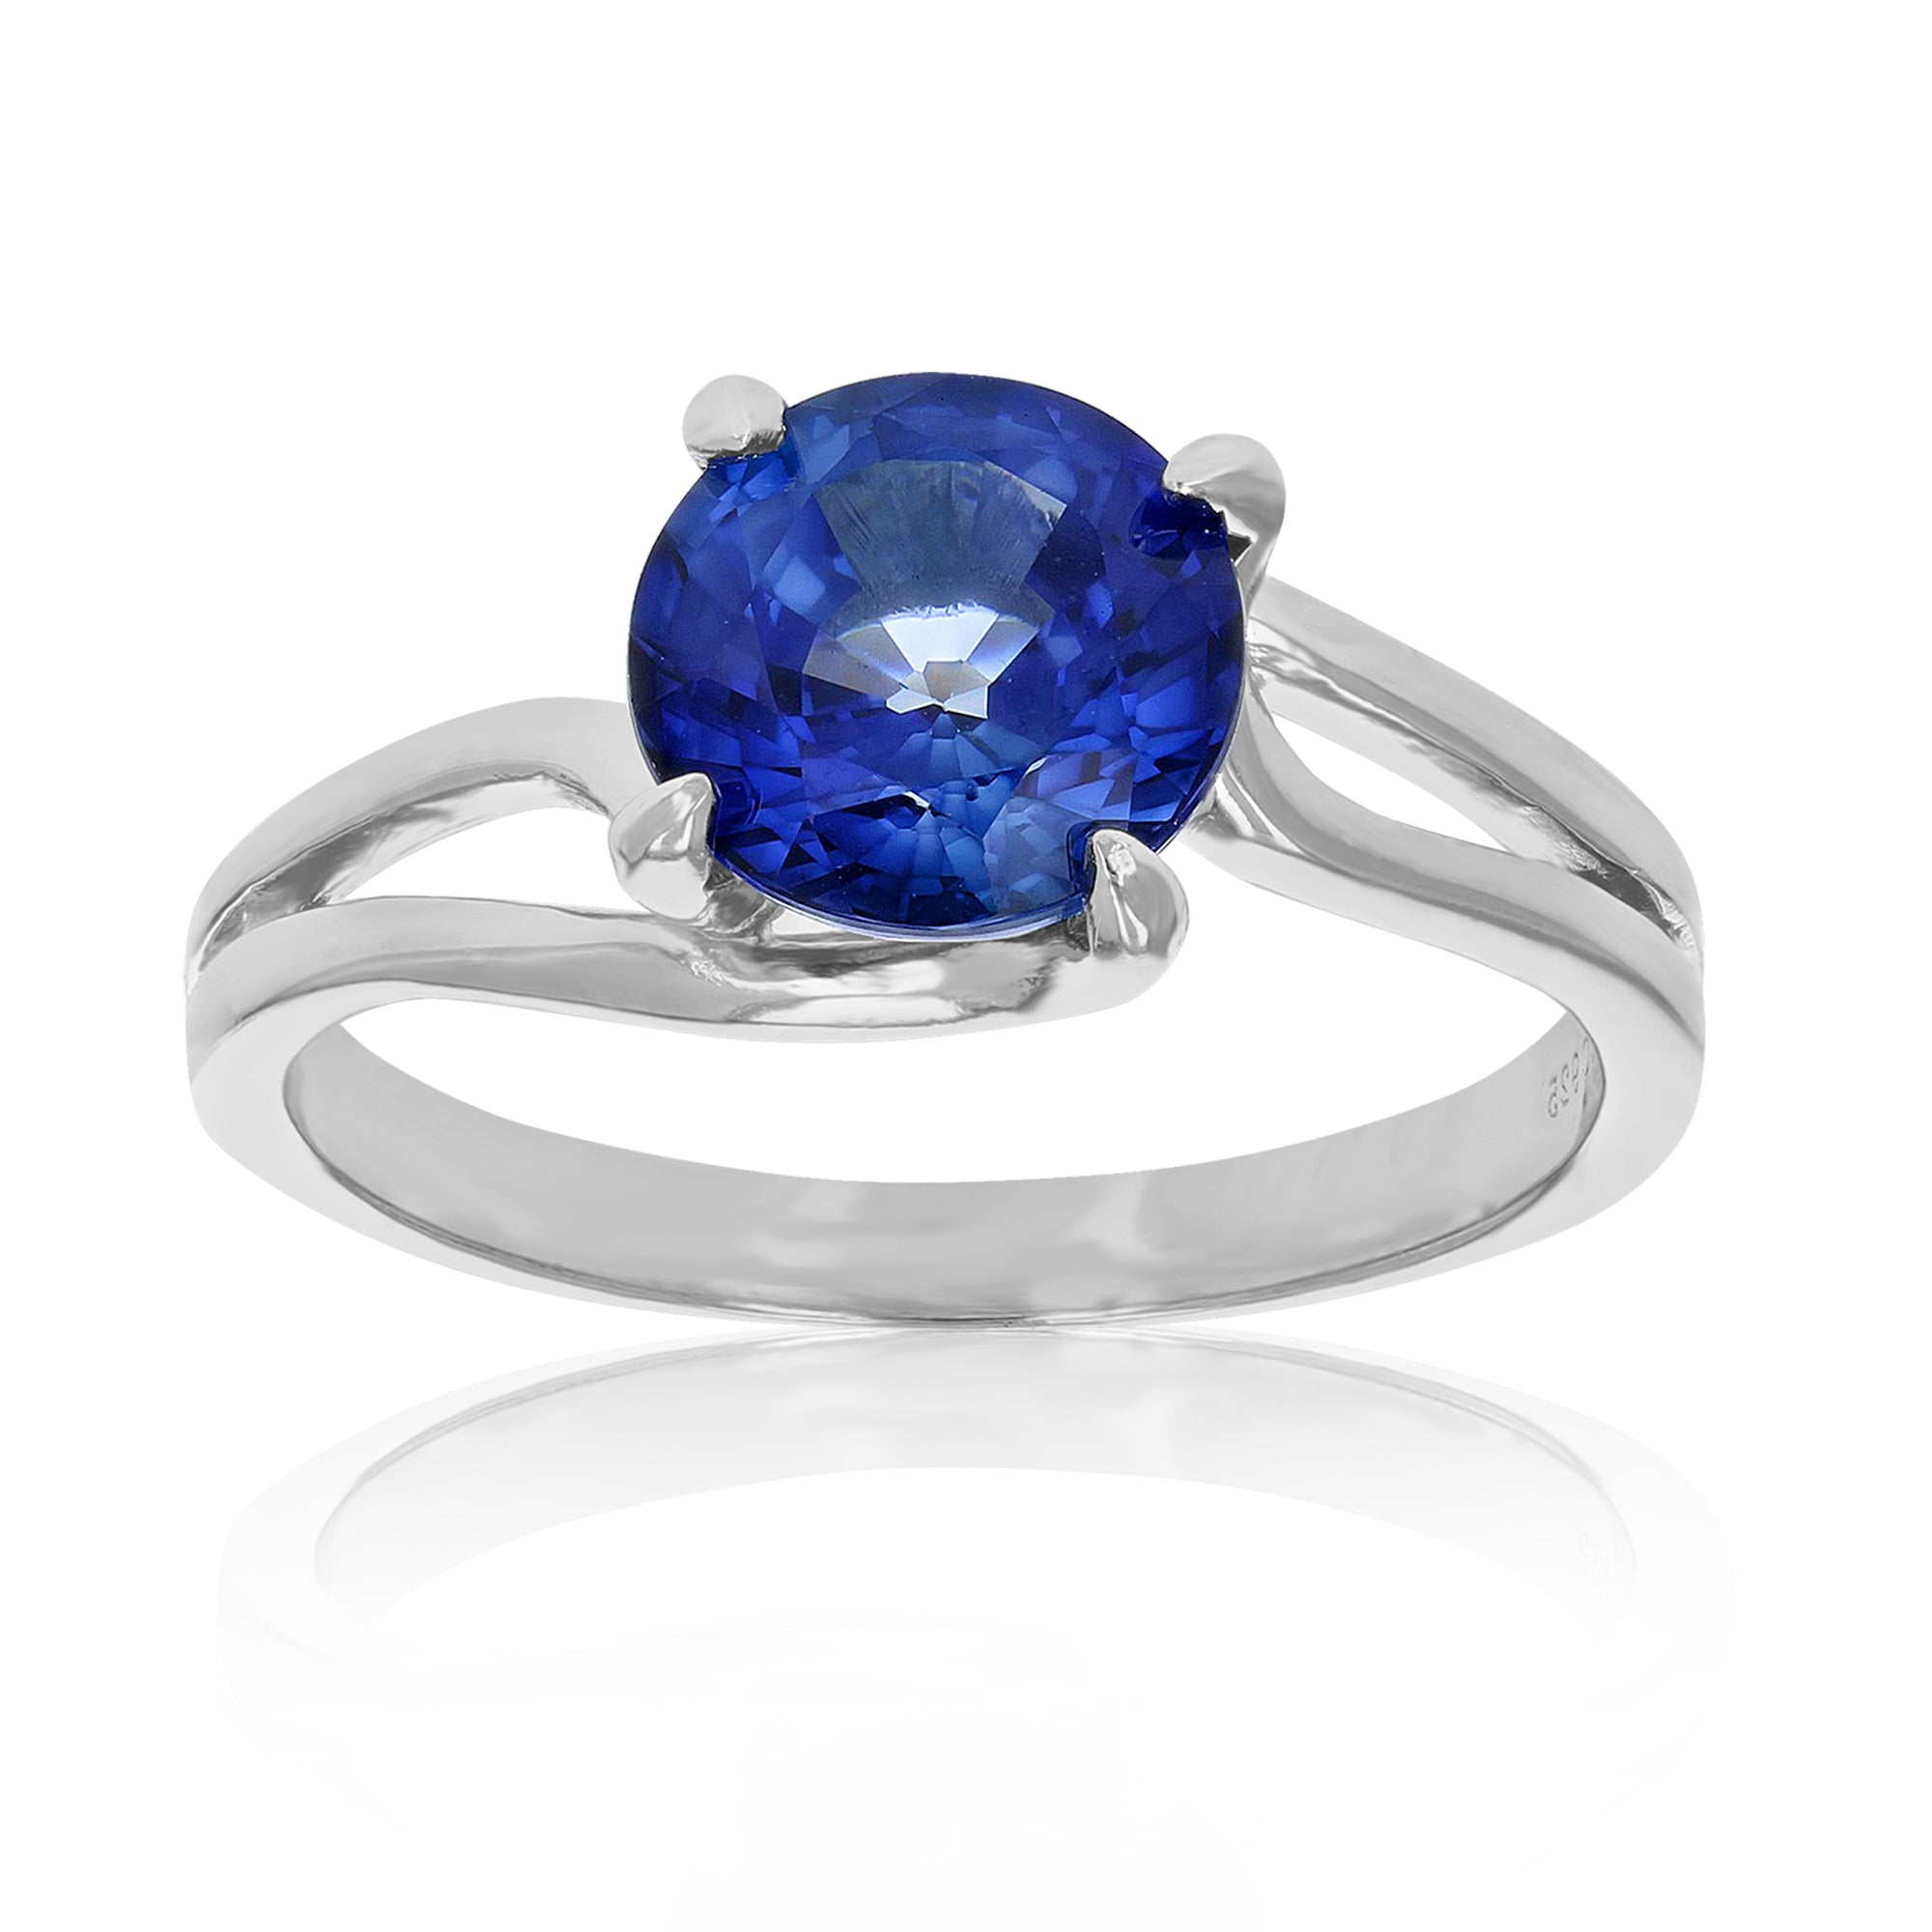 1.90 cttw Created Blue Sapphire Ring .925 Sterling Silver Round 8 MM Size 7